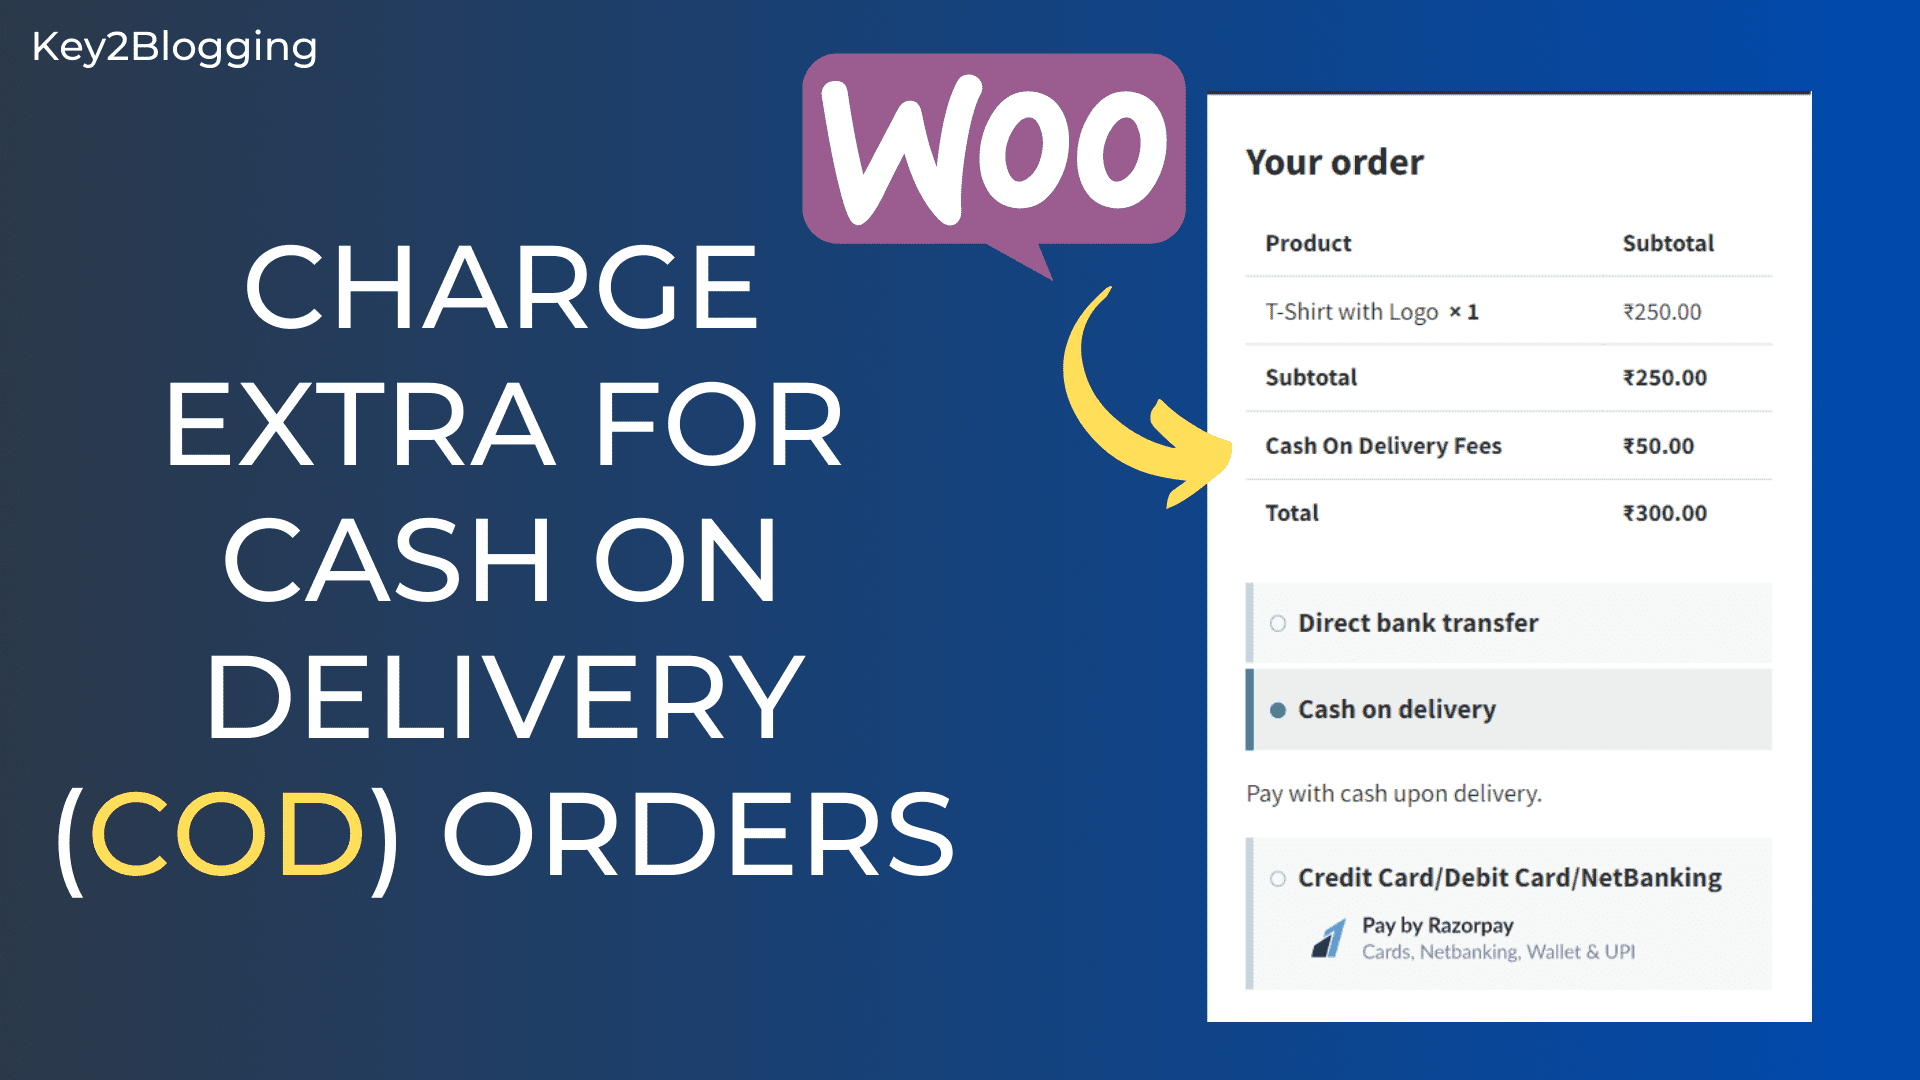 How To Charge Extra For Cash On Delivery (COD) Orders On WooCommerce